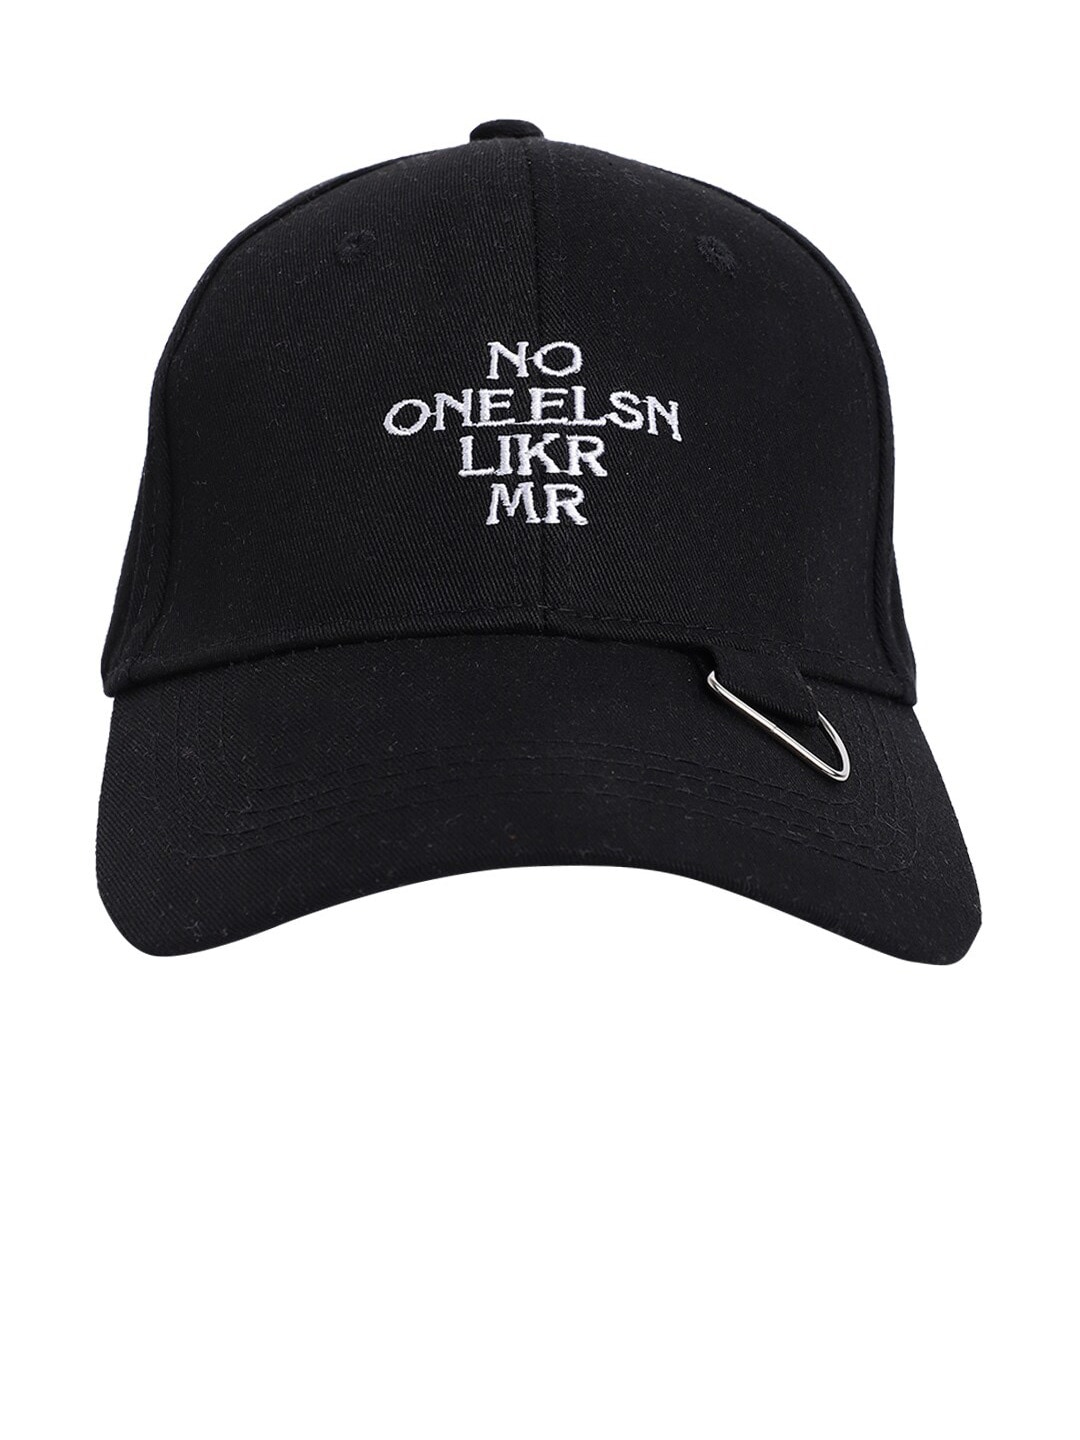 QUIRKY Black & White Printed Baseball Cap Price in India